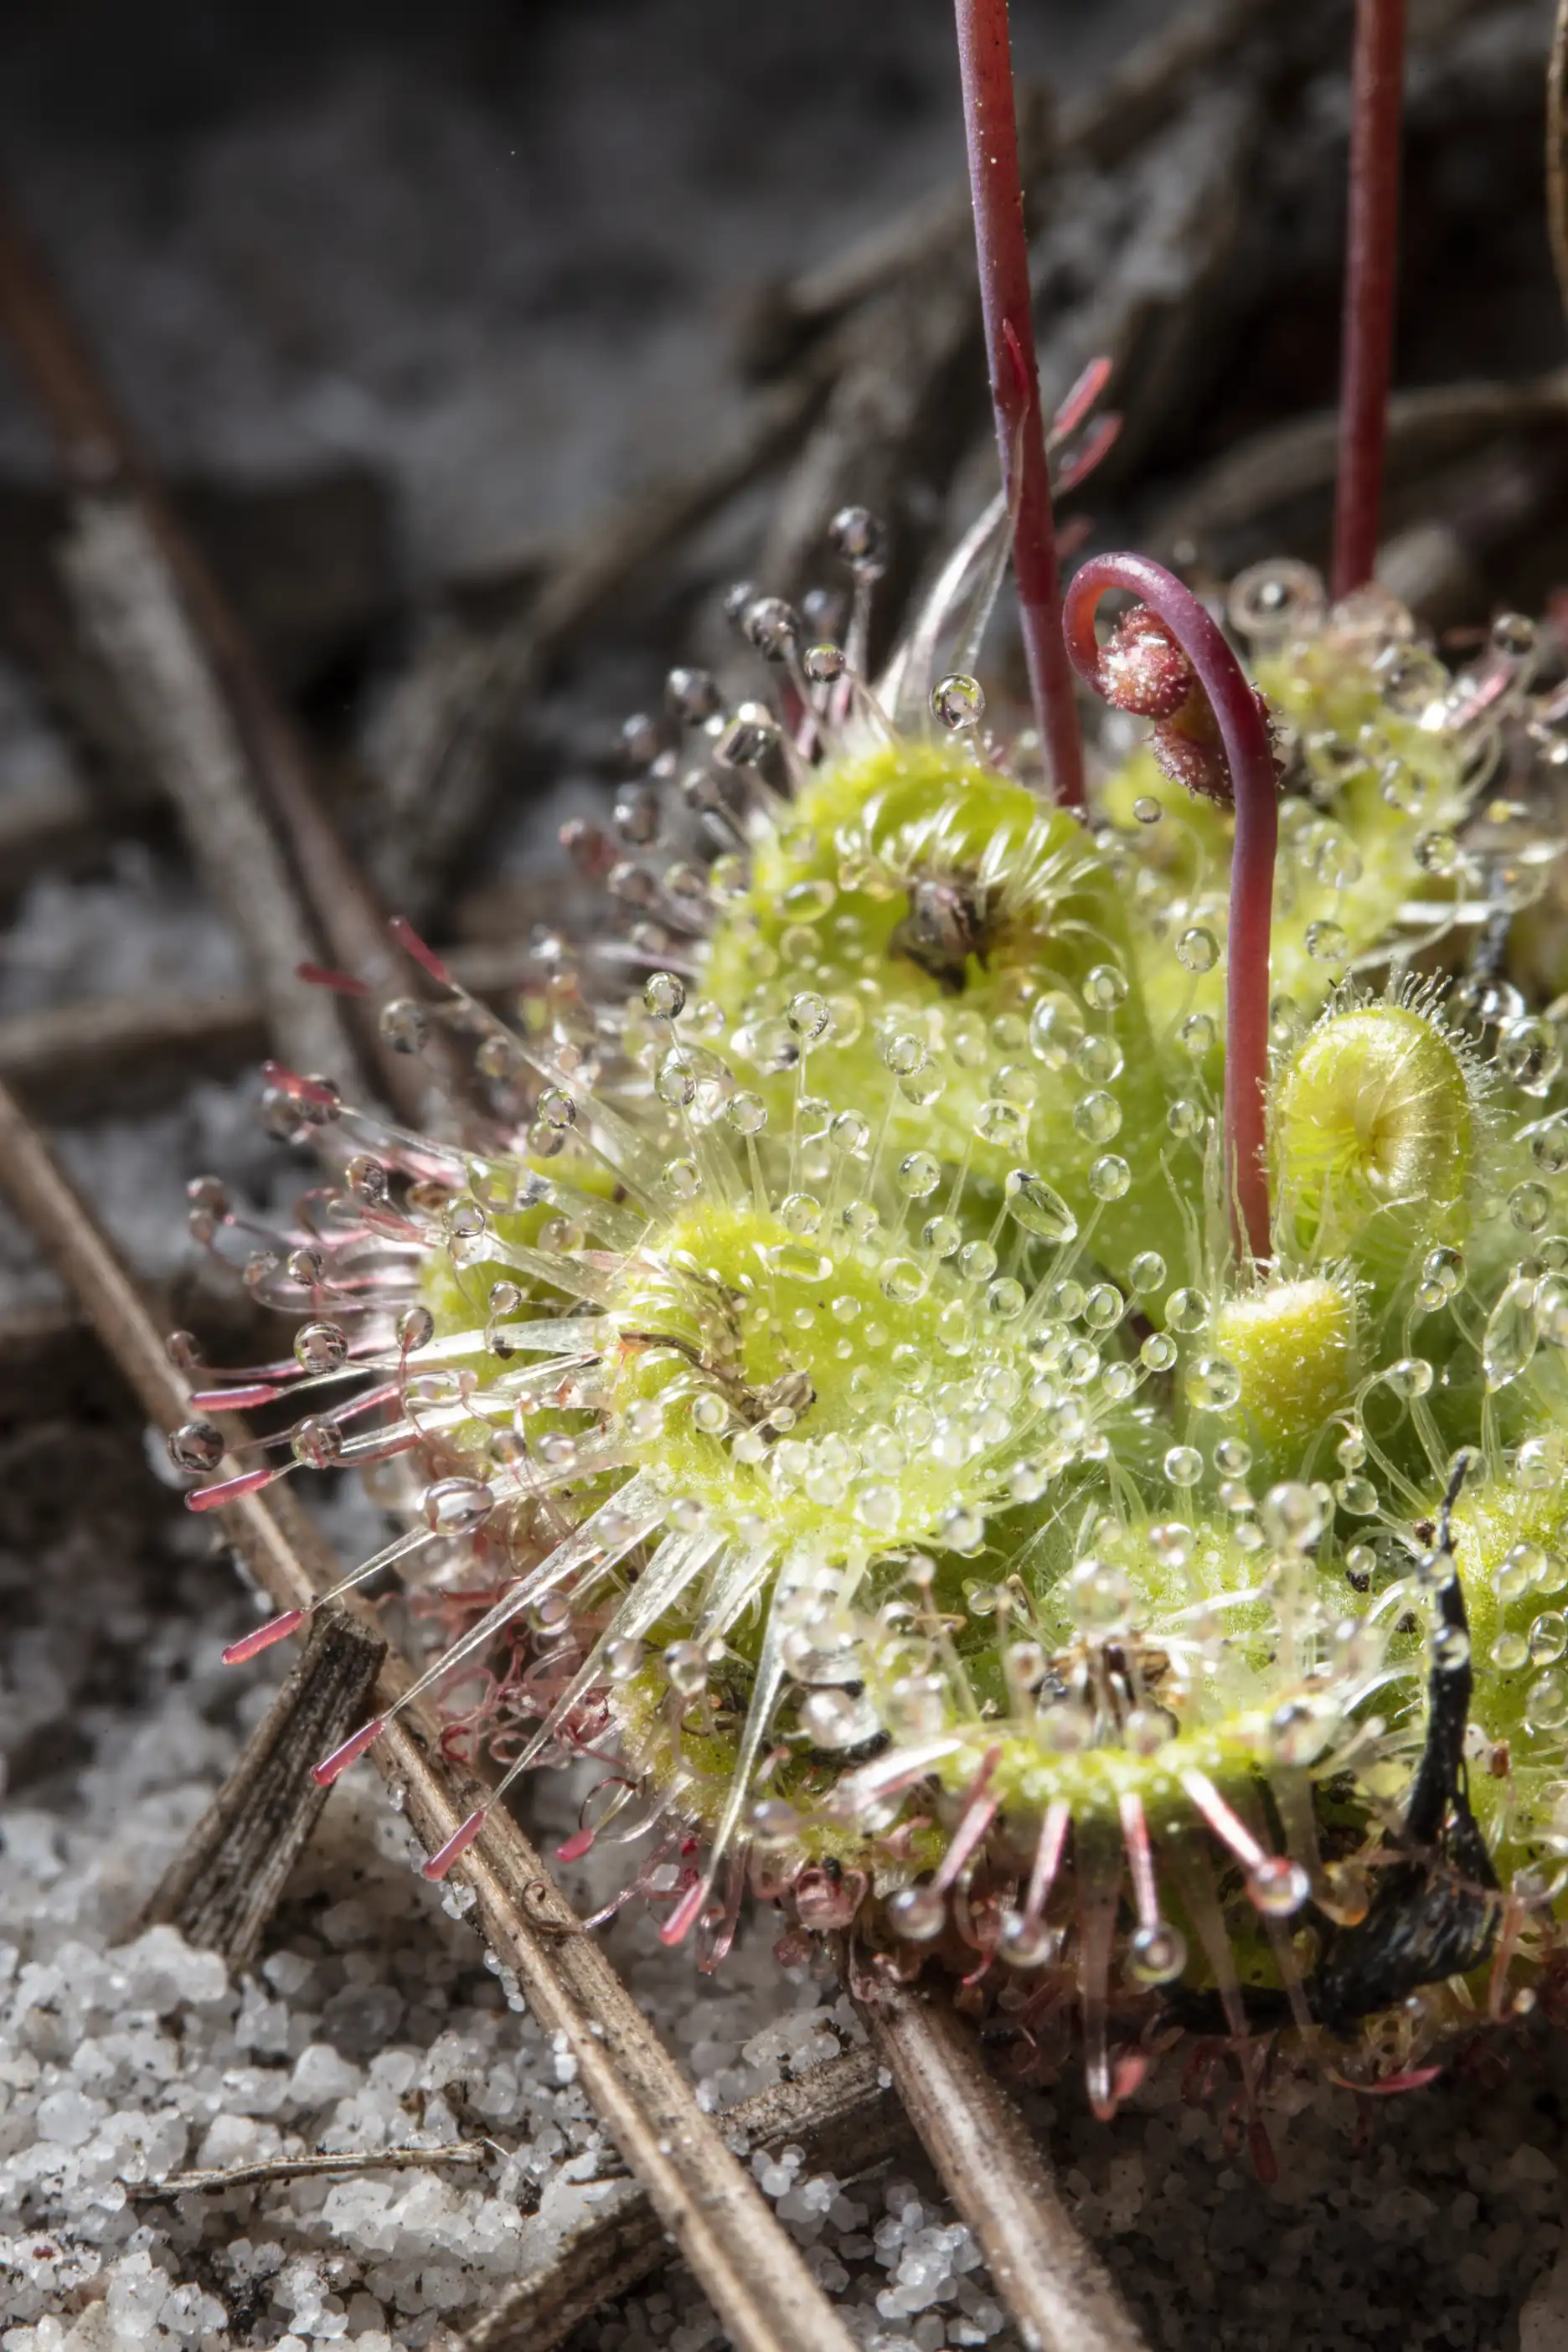 Detail of Drosera burmannii leaves and tentacles